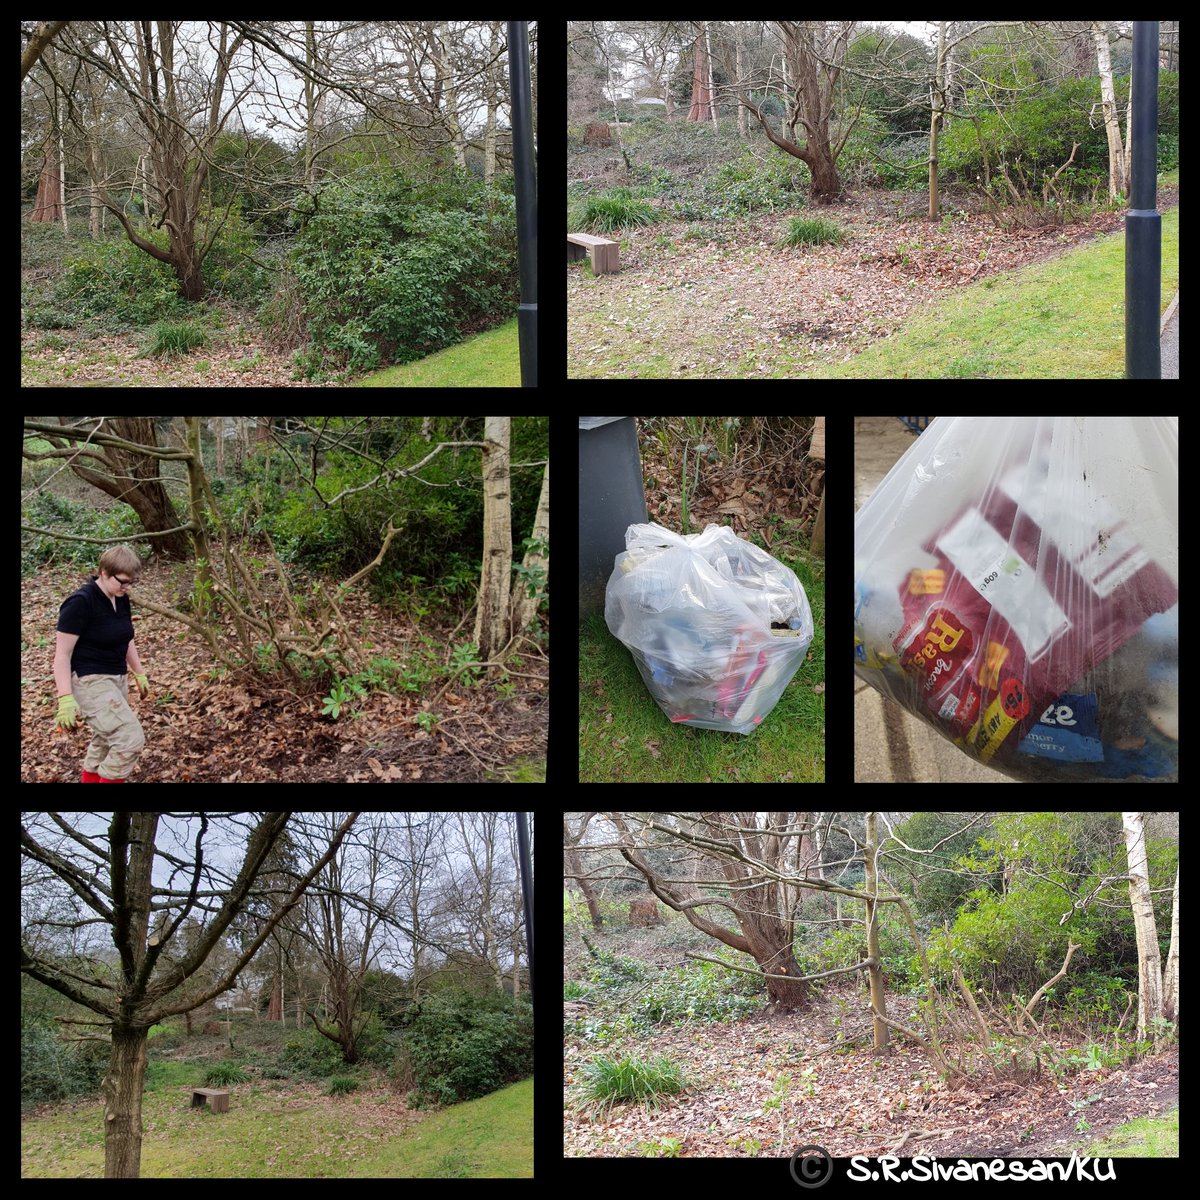 1/2 An amazing day with the vols inc. CITO volunteers from the @GoGeocaching community some of whom are @kingstonalumni as well as @KingstonECE staff & a school student +her mum. Amazing efforts by the three teams working in 3 areas clearing invasive plants from our woods 🤩